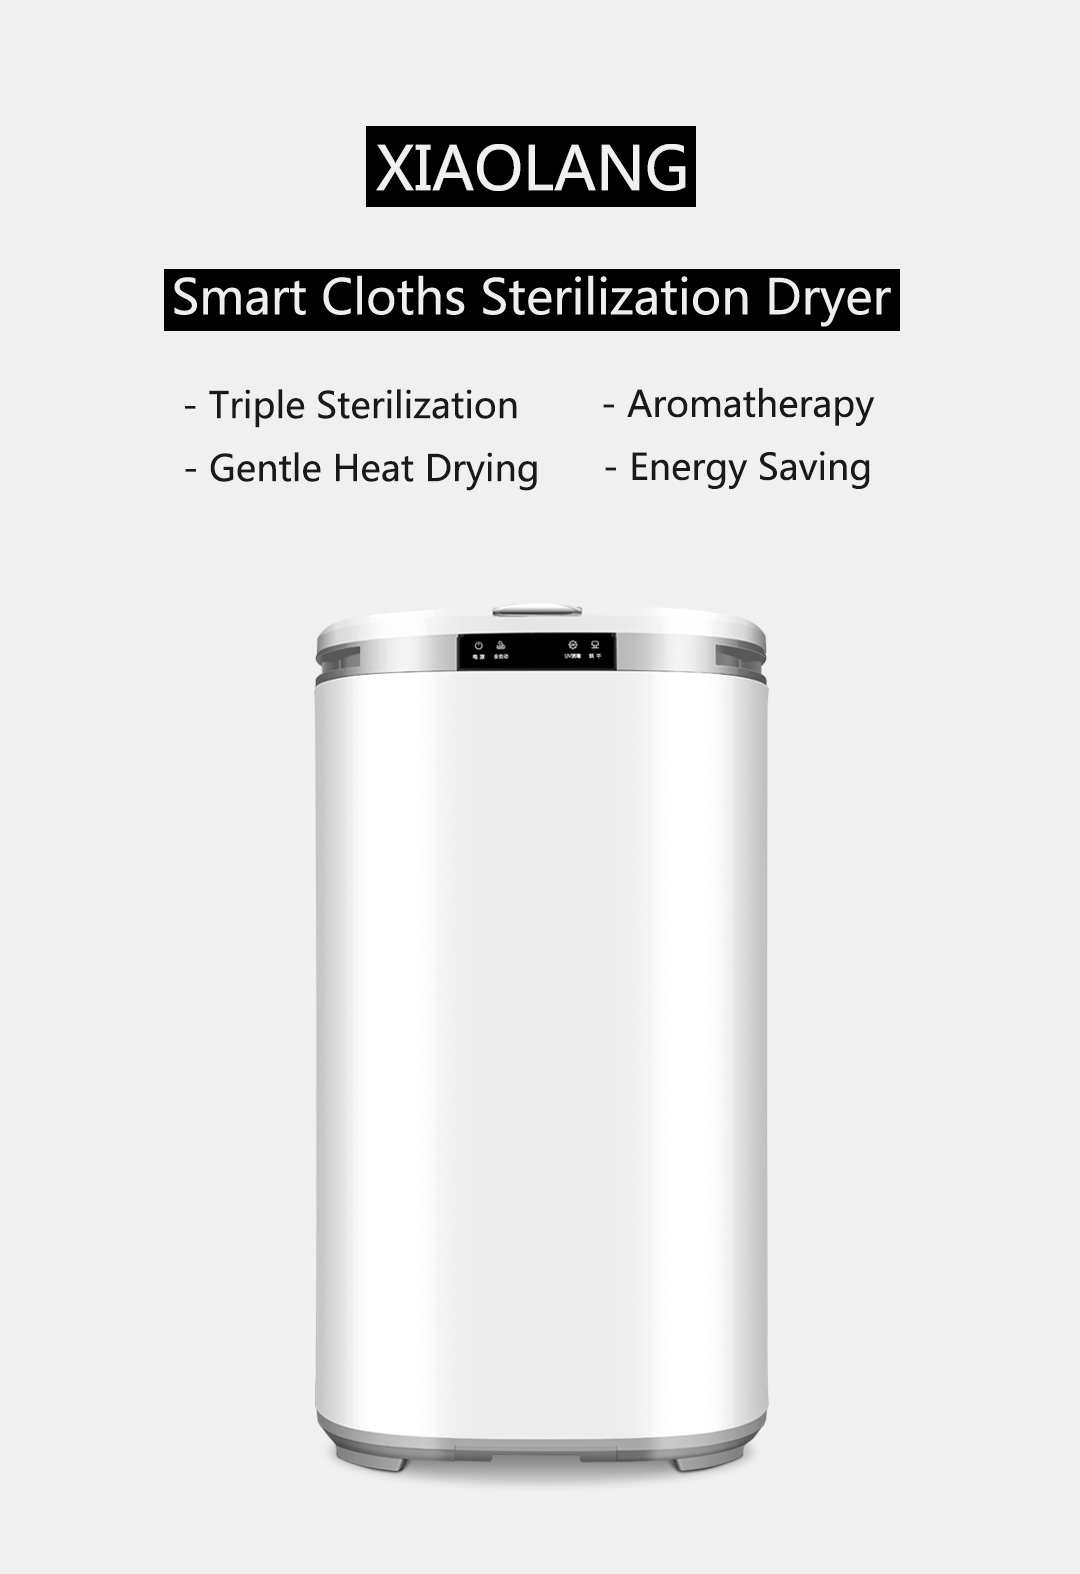 XIAOLANG-Household-Clothing-Heater-Dryer-Disinfection-Machine-Clothes-Drying-UV-Sterilization-Ozoniz-1591136